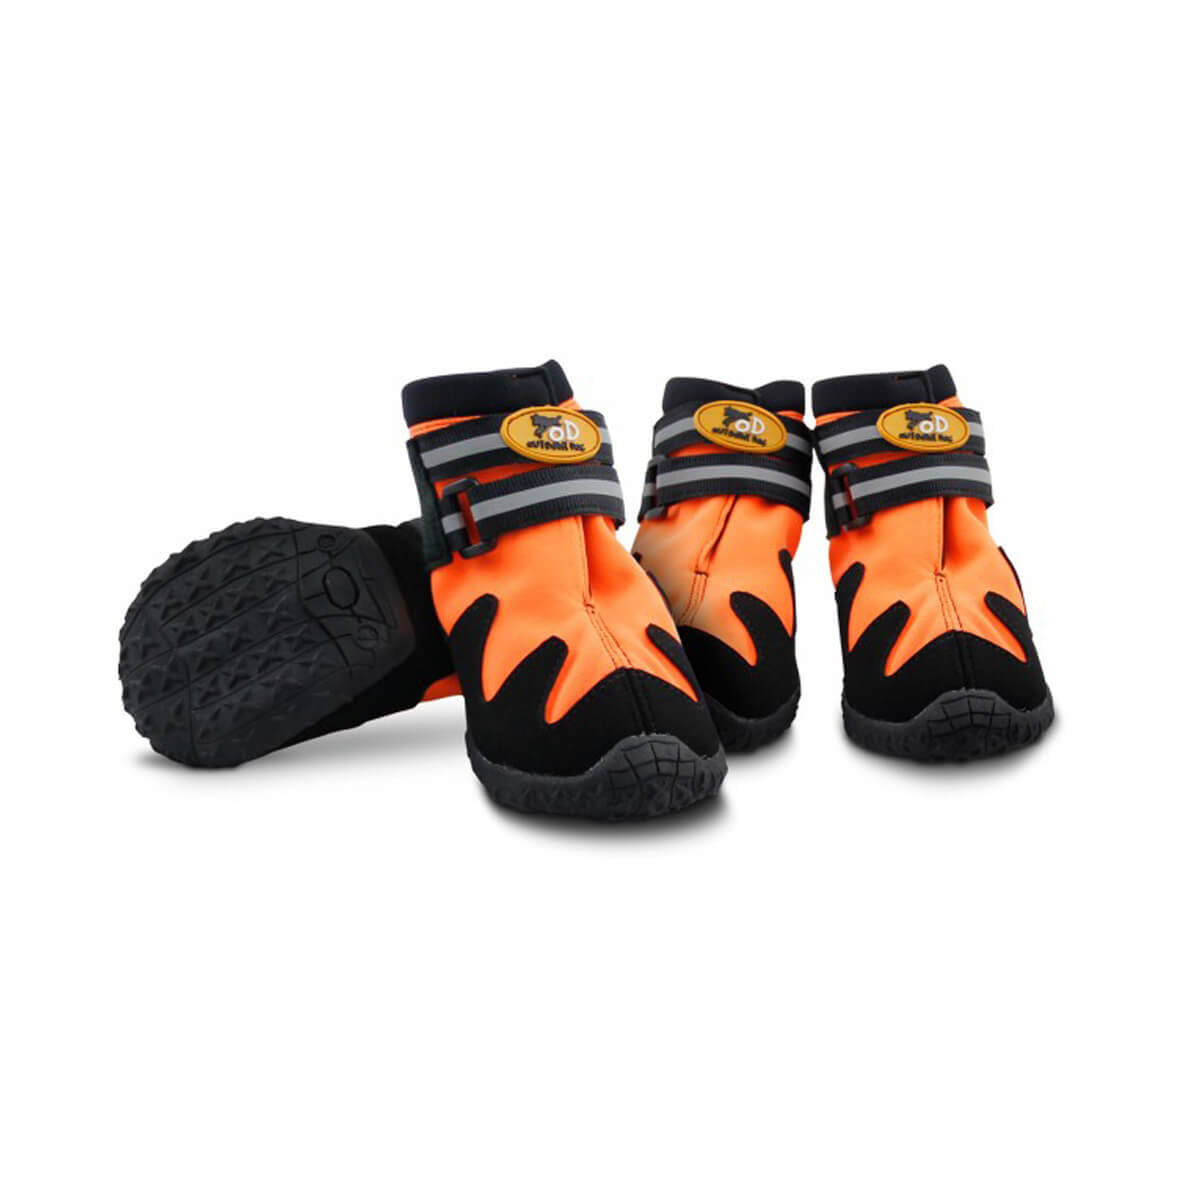 Orange and black booties for dogs